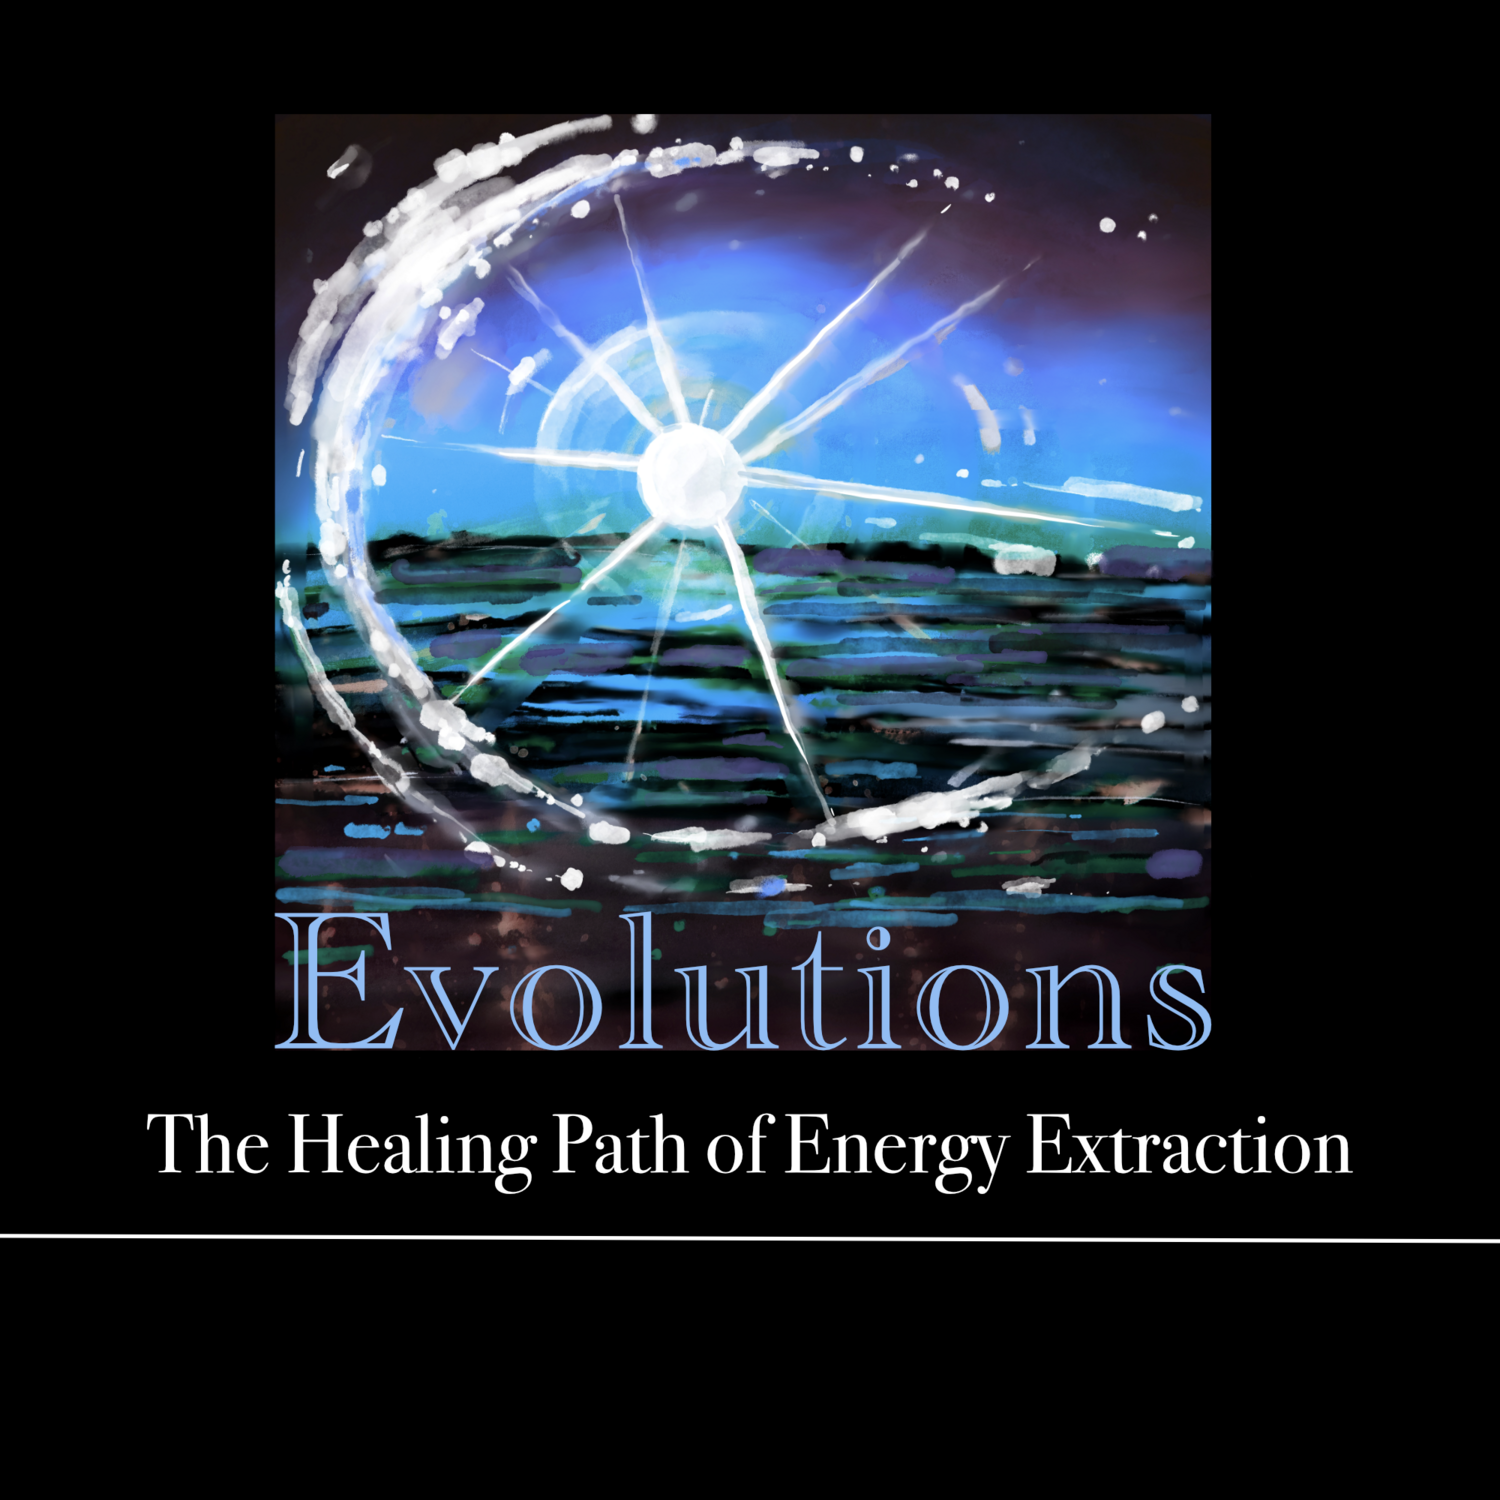 Evolutions, The Healing Path of Energy Extraction